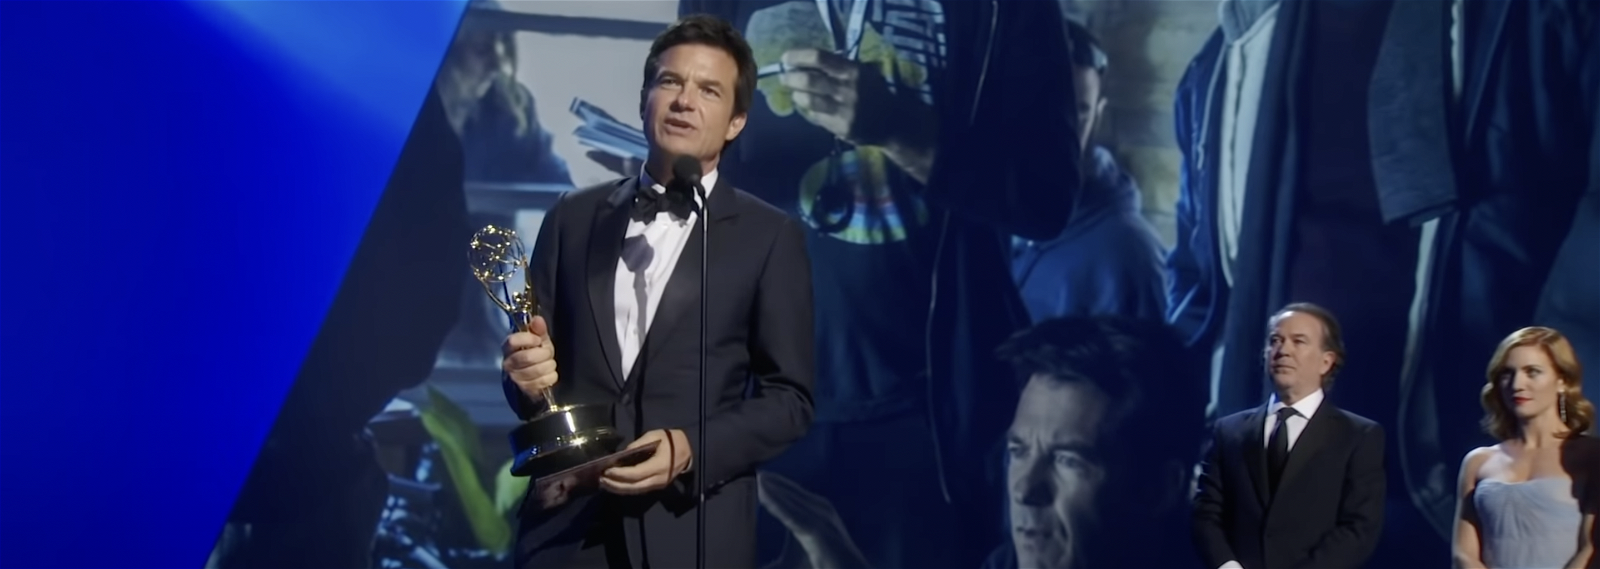 Throwback to When Jason Bateman Casually Walked Up the Stage to Collect His Emmy for Best Director for ‘Ozark’